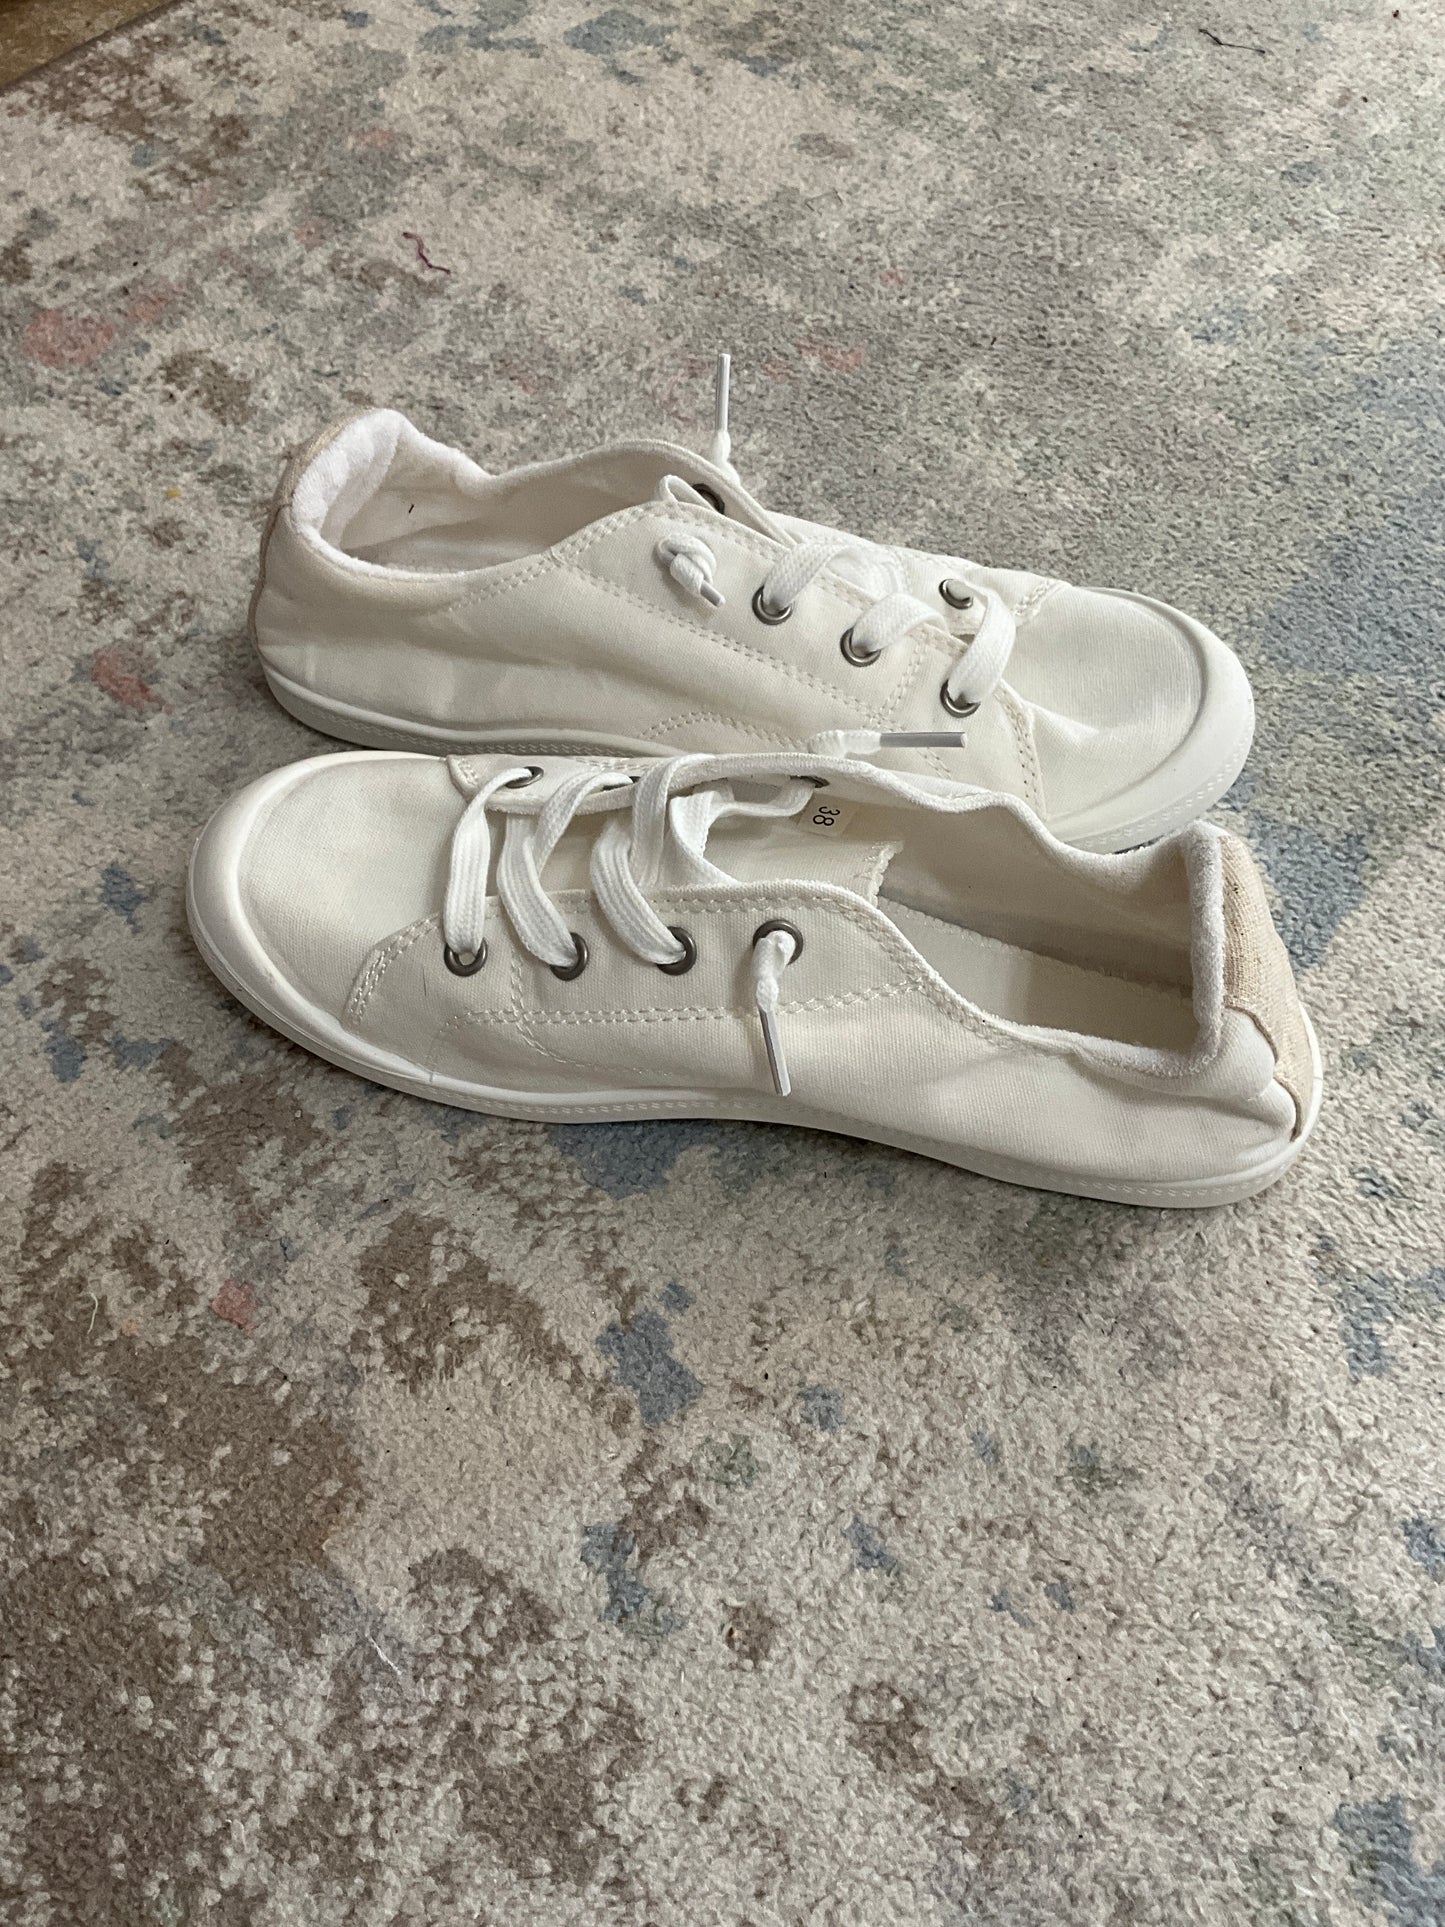 Rts- white mom shoes